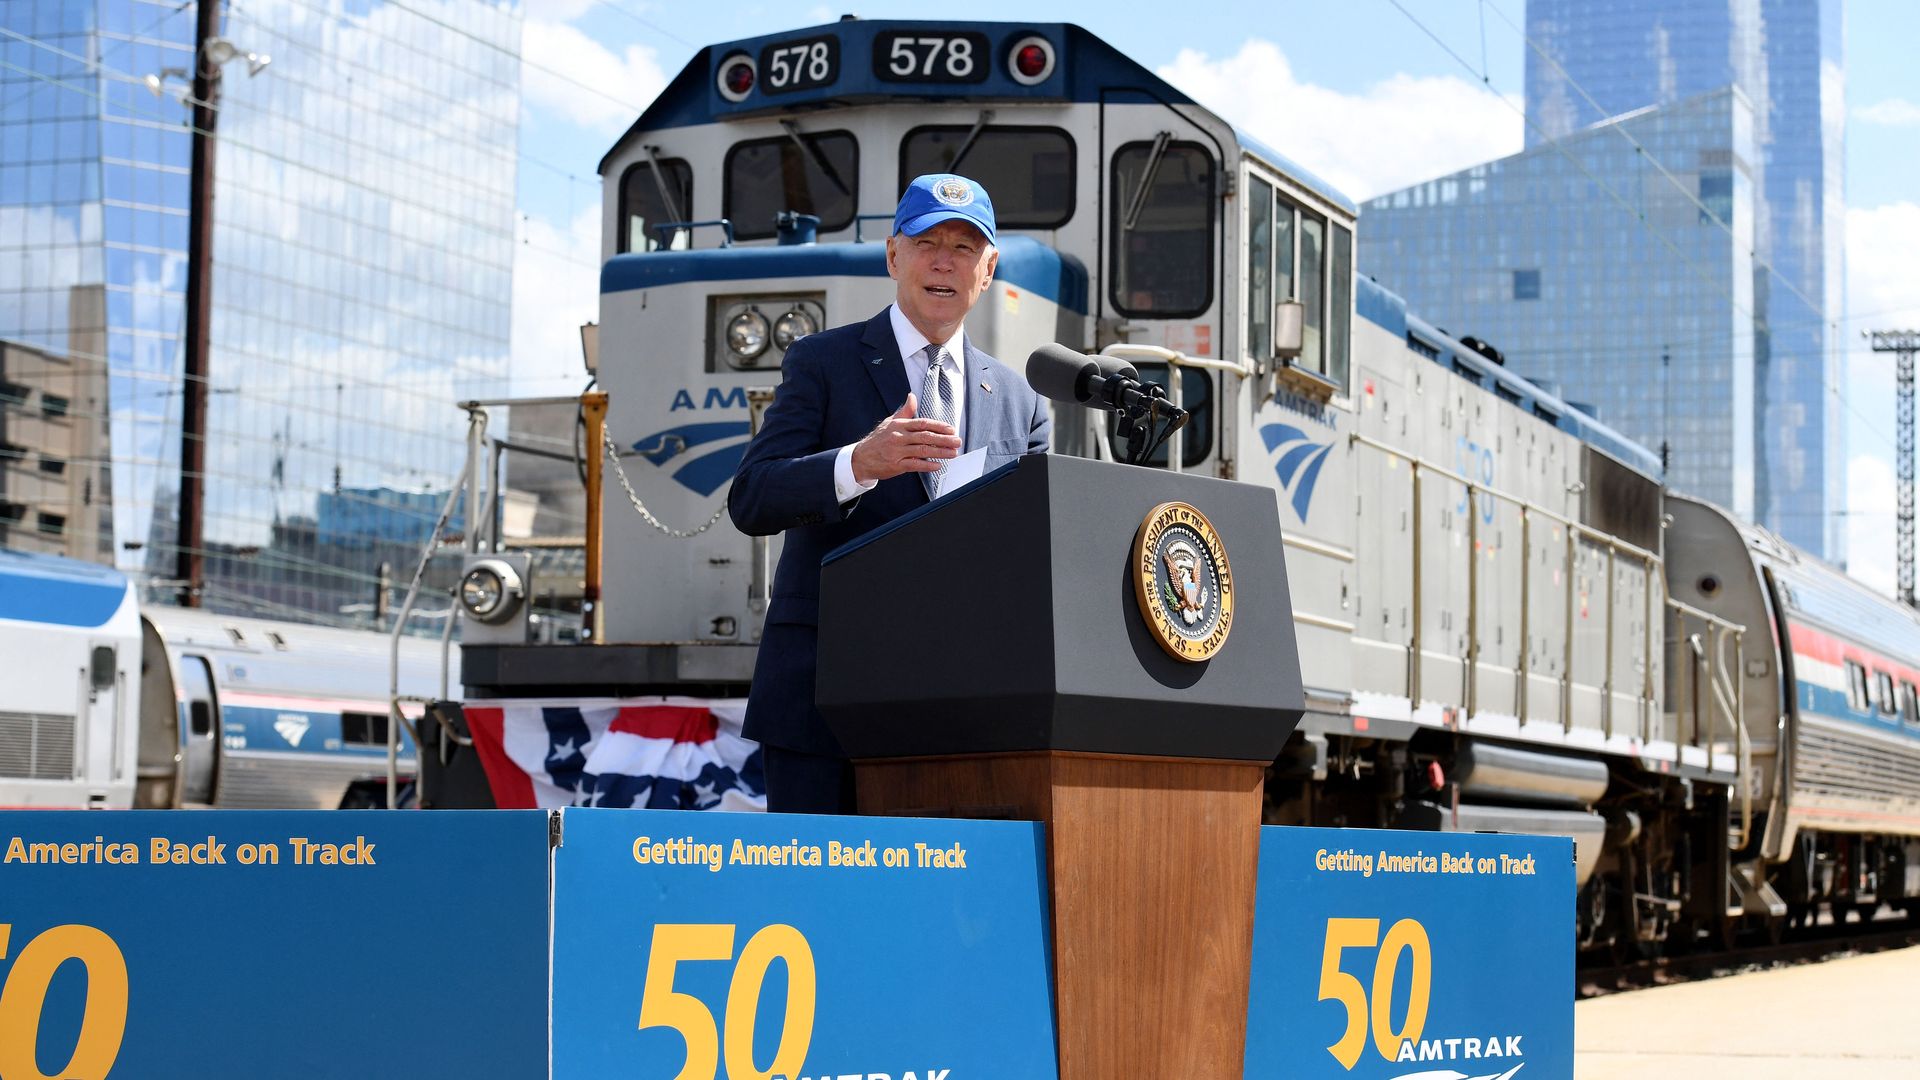 President Biden is seen standing before an Amtrak train engine as he touts his infrastructure proposal.